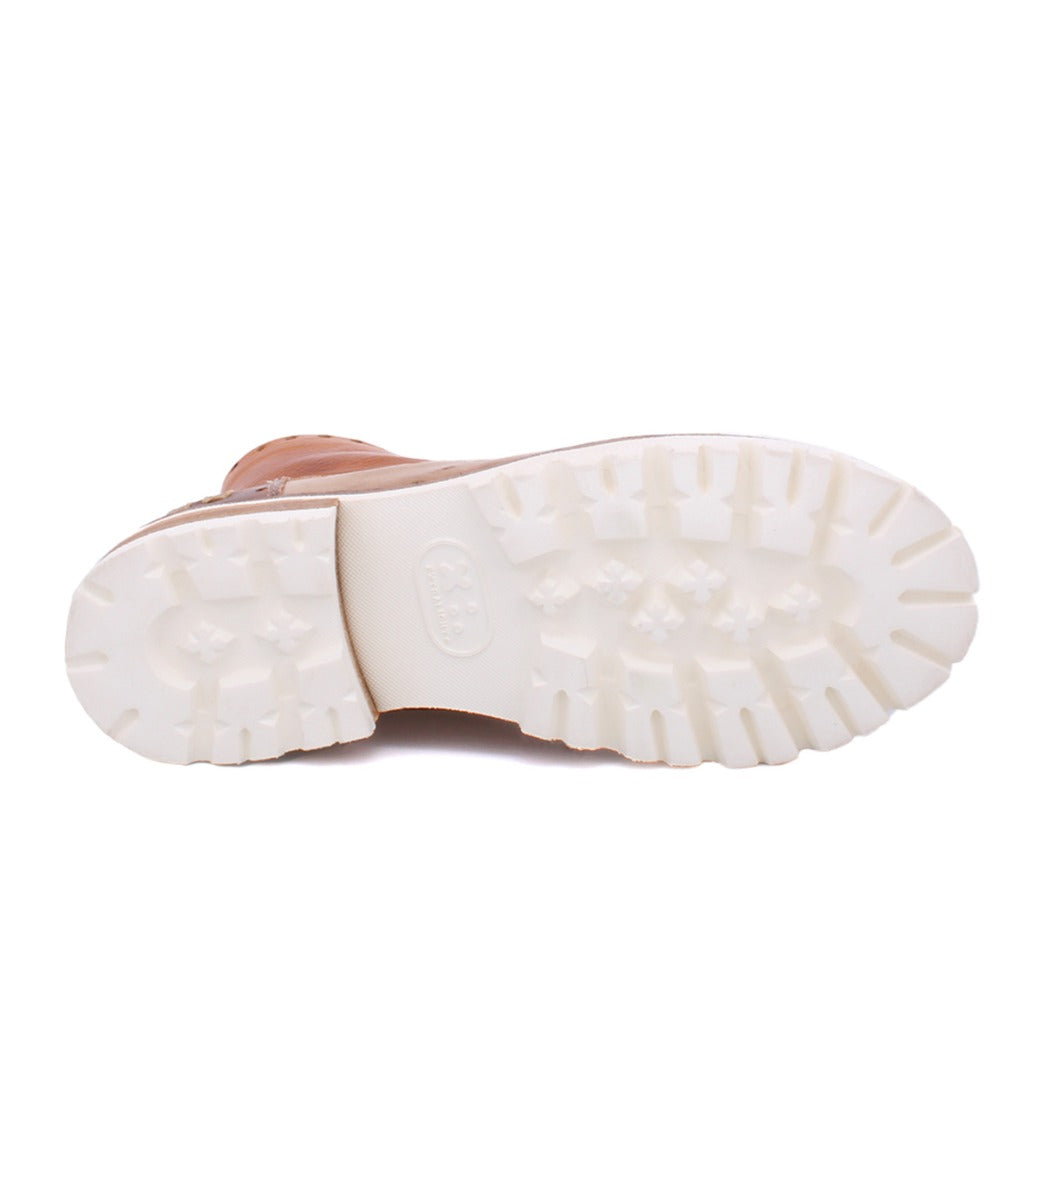 A pair of Bed Stu Quatro III women's shoes with white soles on a white background.